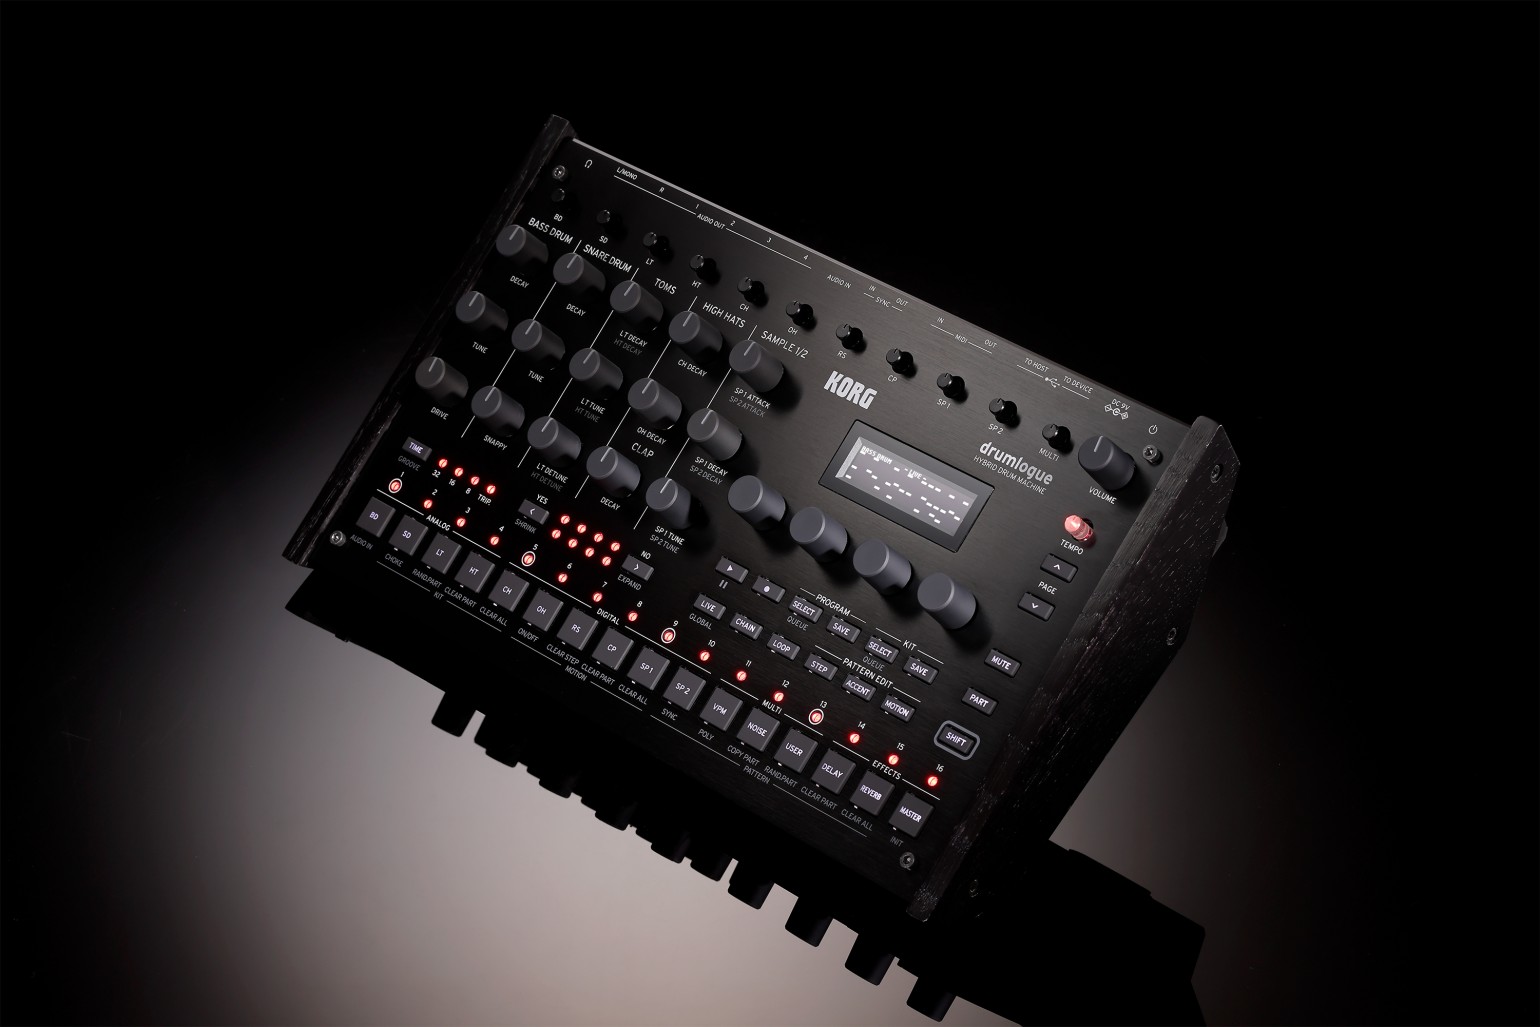 Korg’s Drumlogue is an analog drum machine with a powerful digital engine